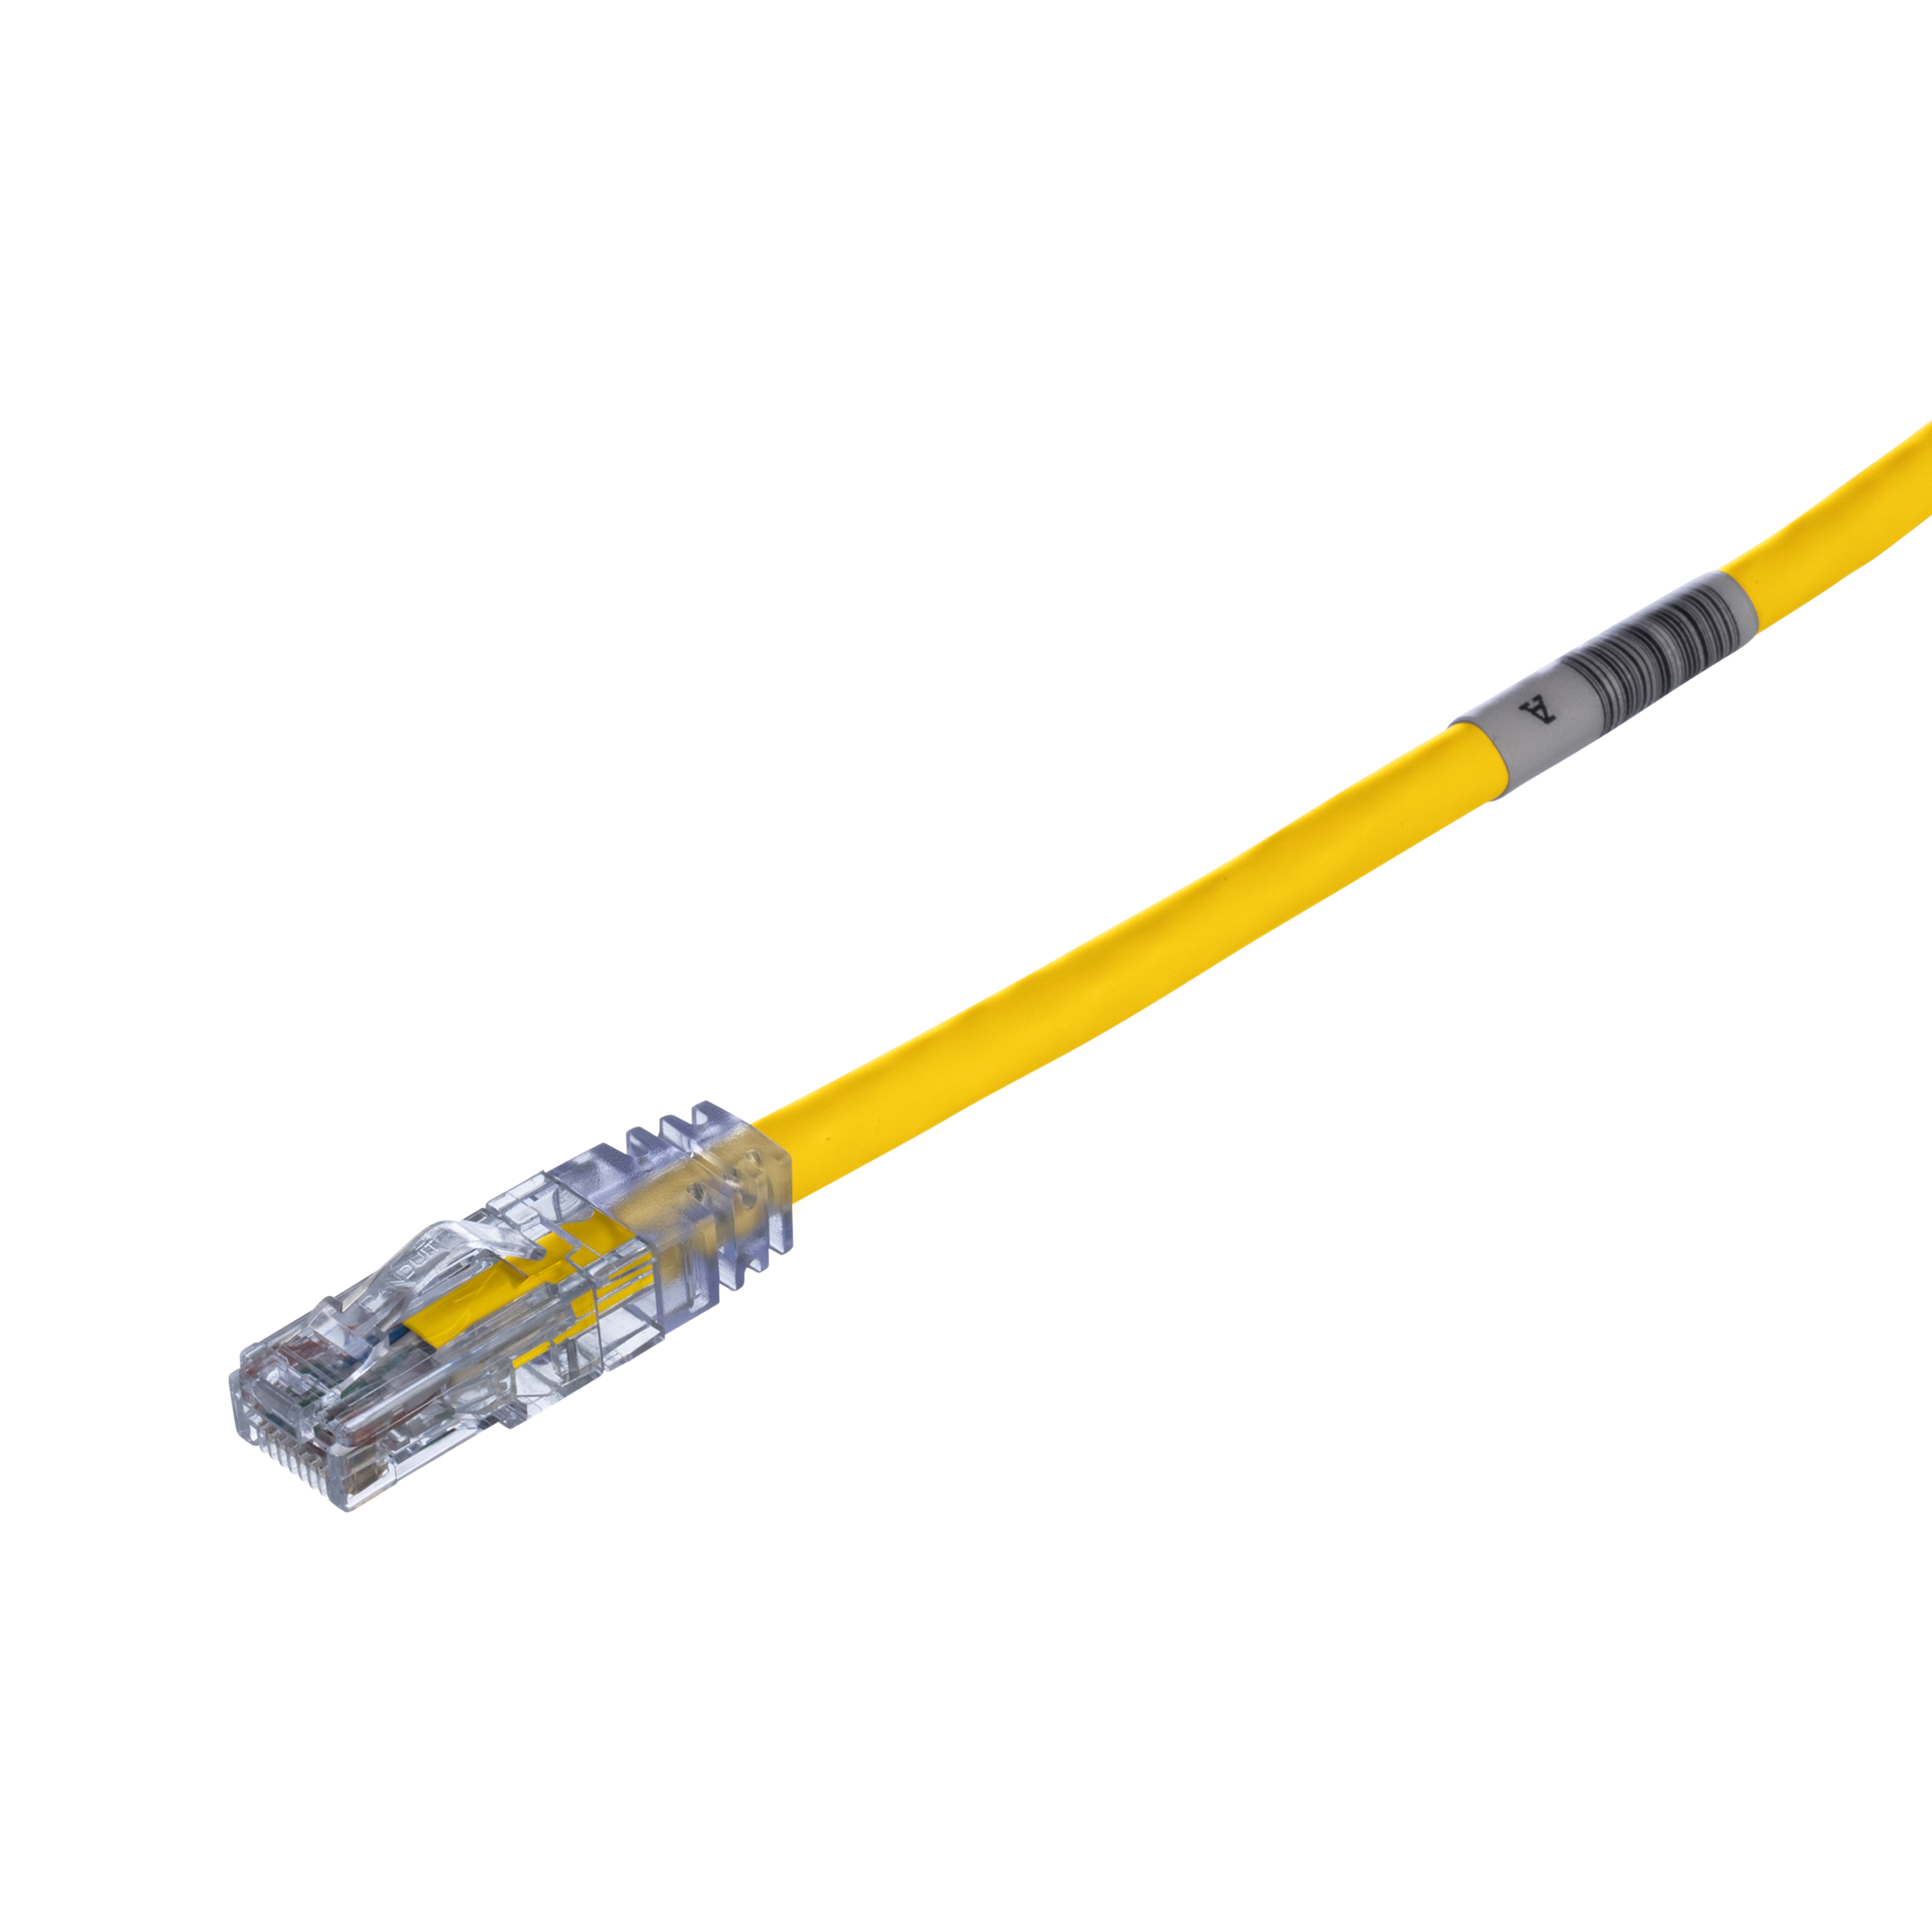 Cat 6 24 AWG UTP Copper Patch Cord, 1 m, Yellow